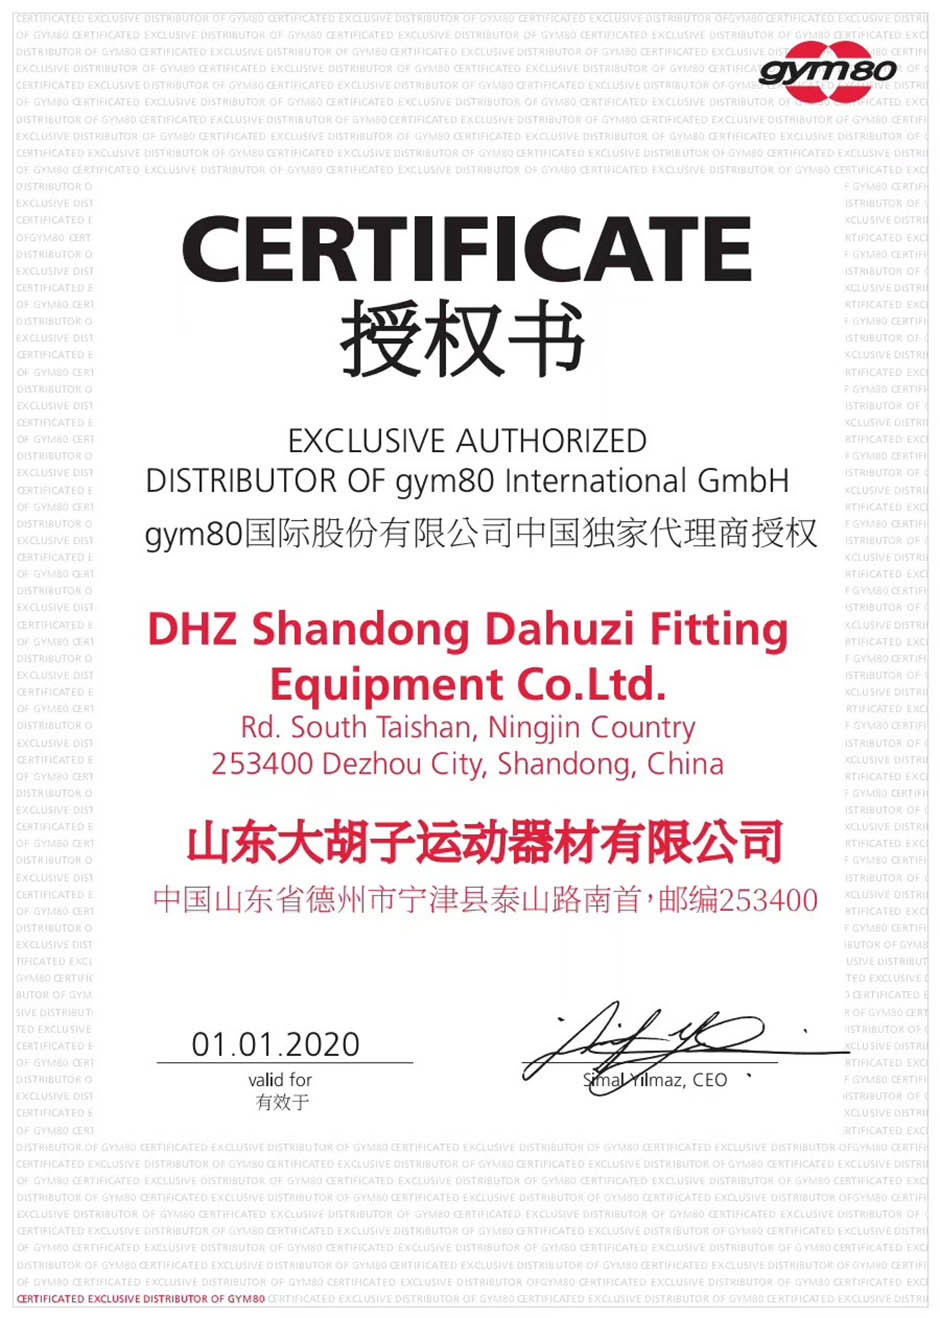 DHZ Fitness Signed The Exclusive Agency Of_Gym80 In China`